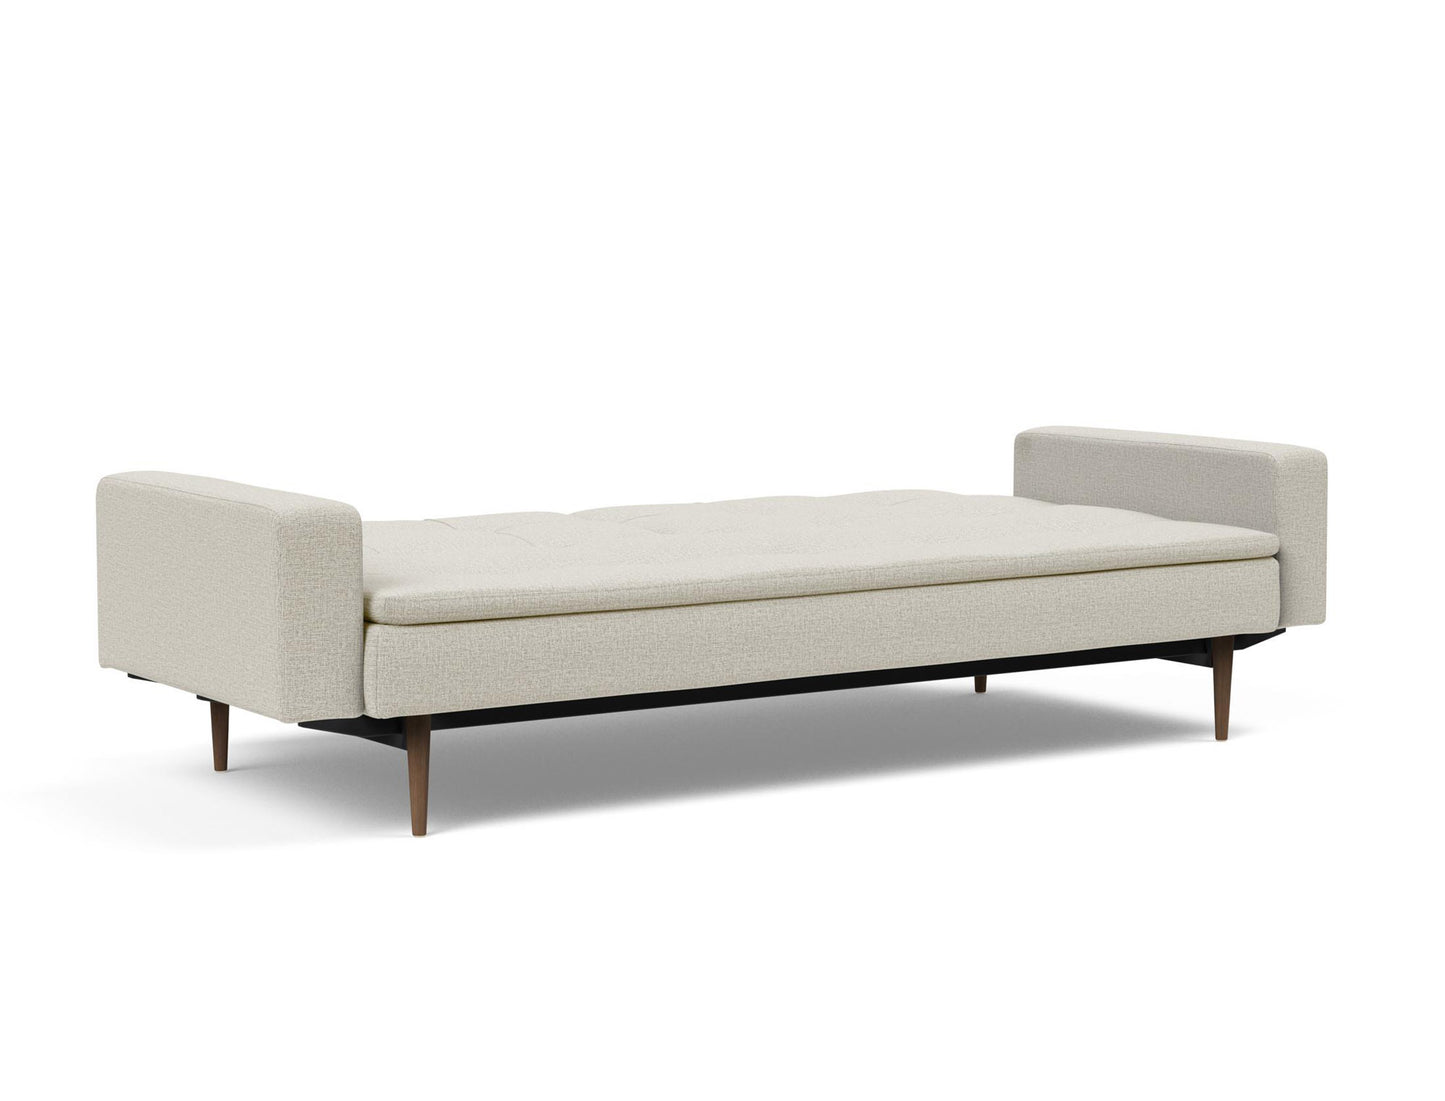 Innovation Living Dublexo Deluxe Sofa Bed Dark Wood with Arms